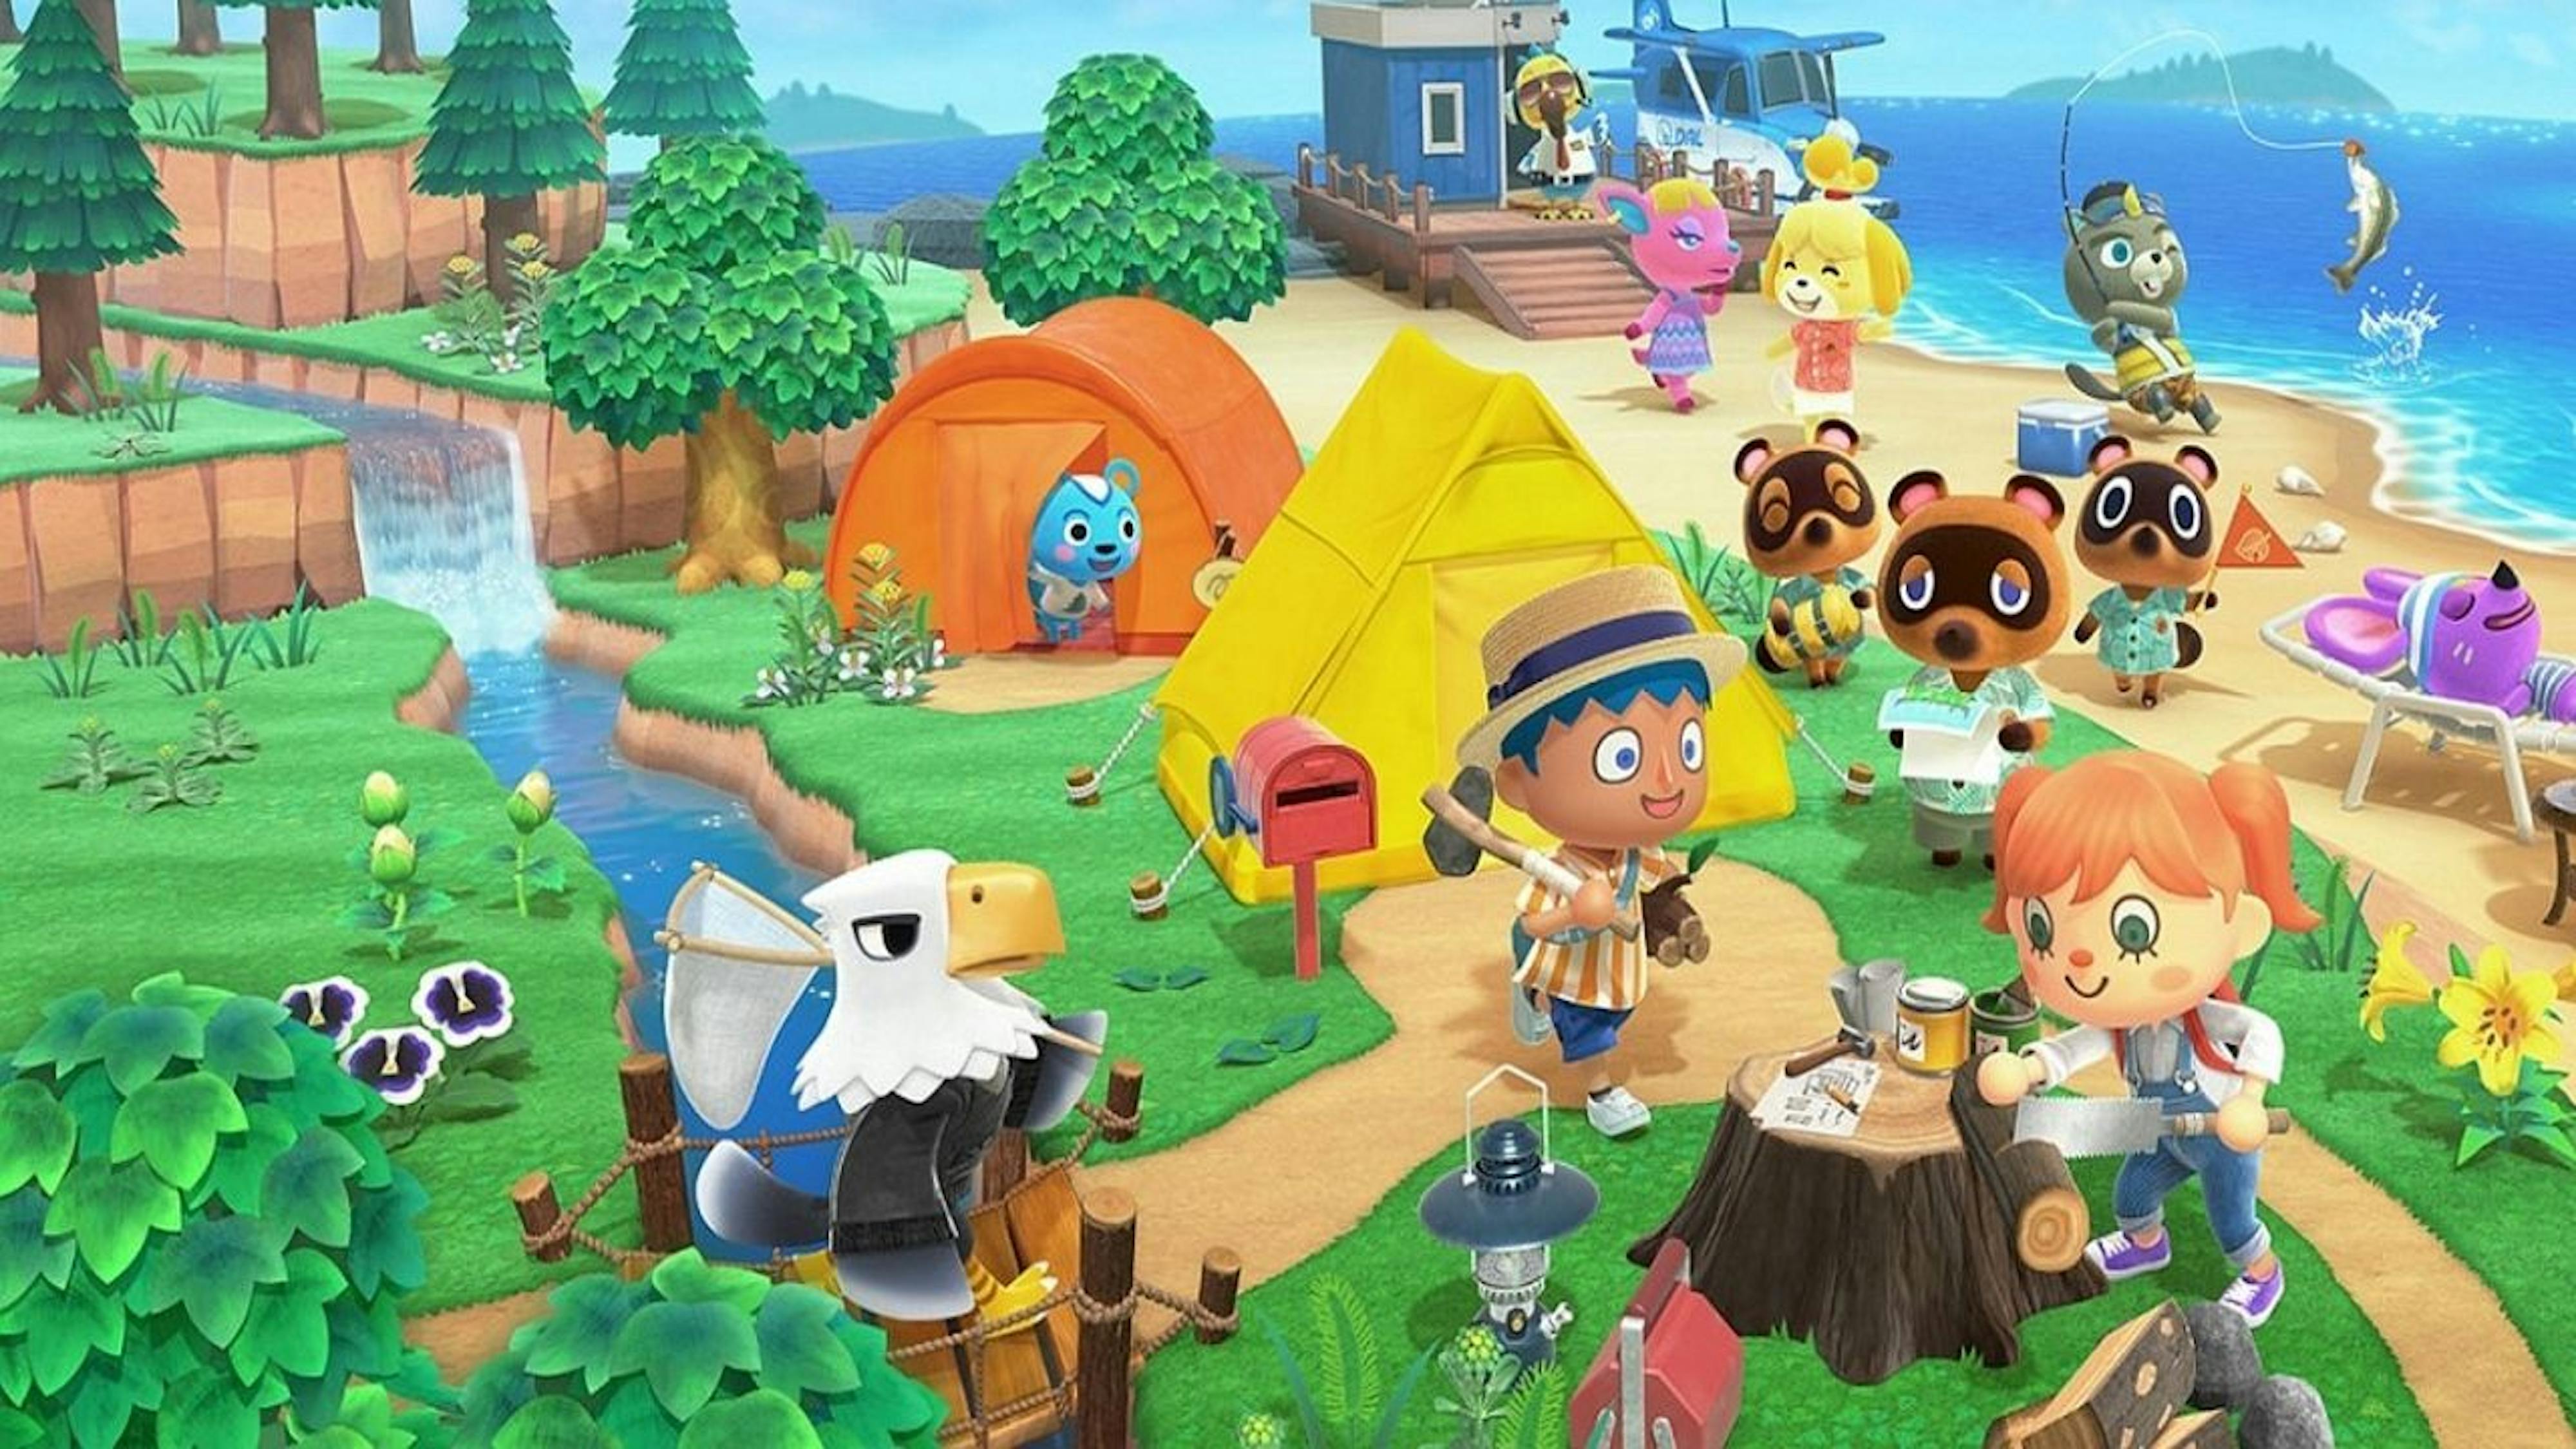 A community of humans and animals gathered in the game Animal Crossing.